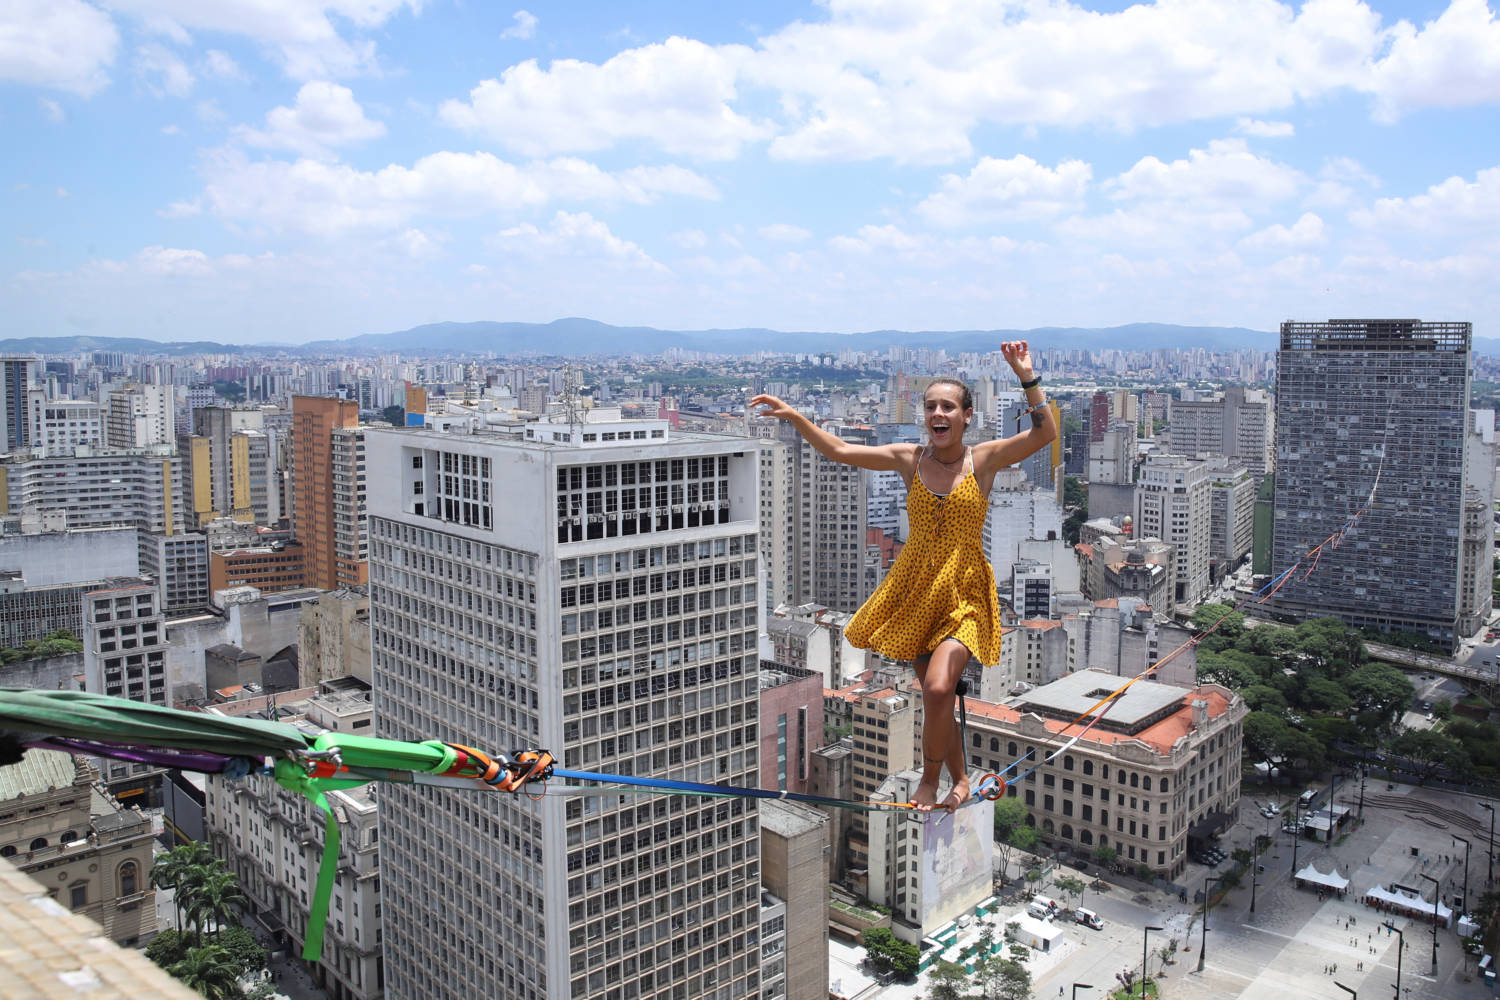 Highliners Walk On The Longest Line Of The Americas In Sao Paulo